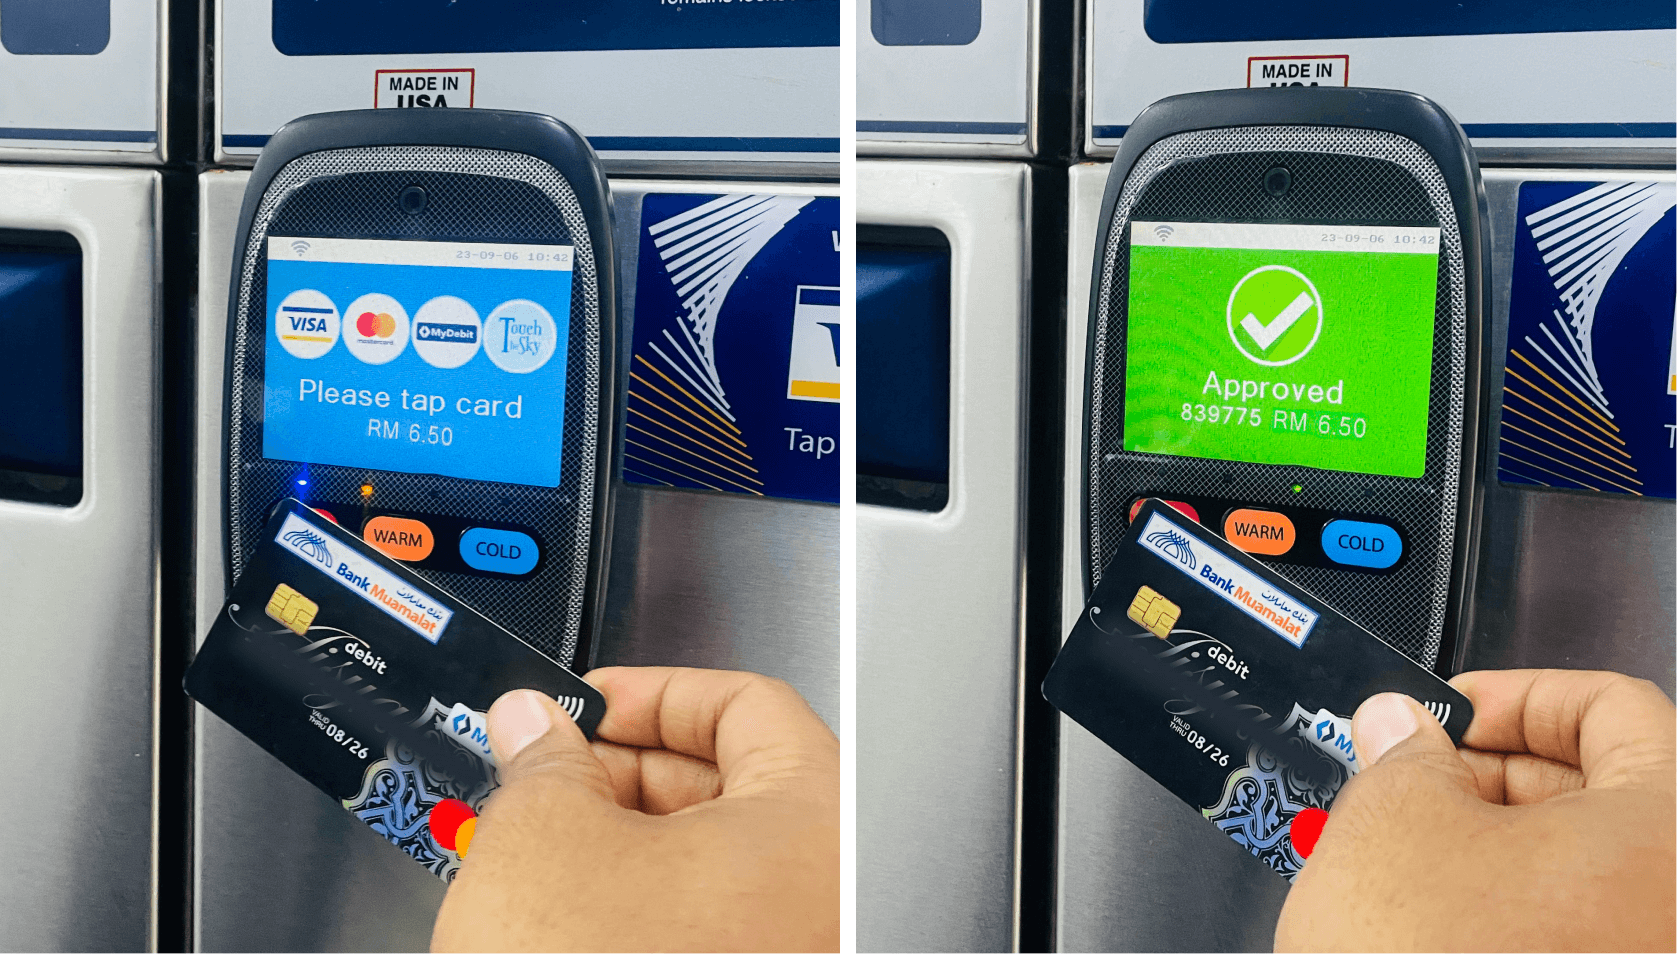 Payment through tapping the card on Paywave terminal on washer